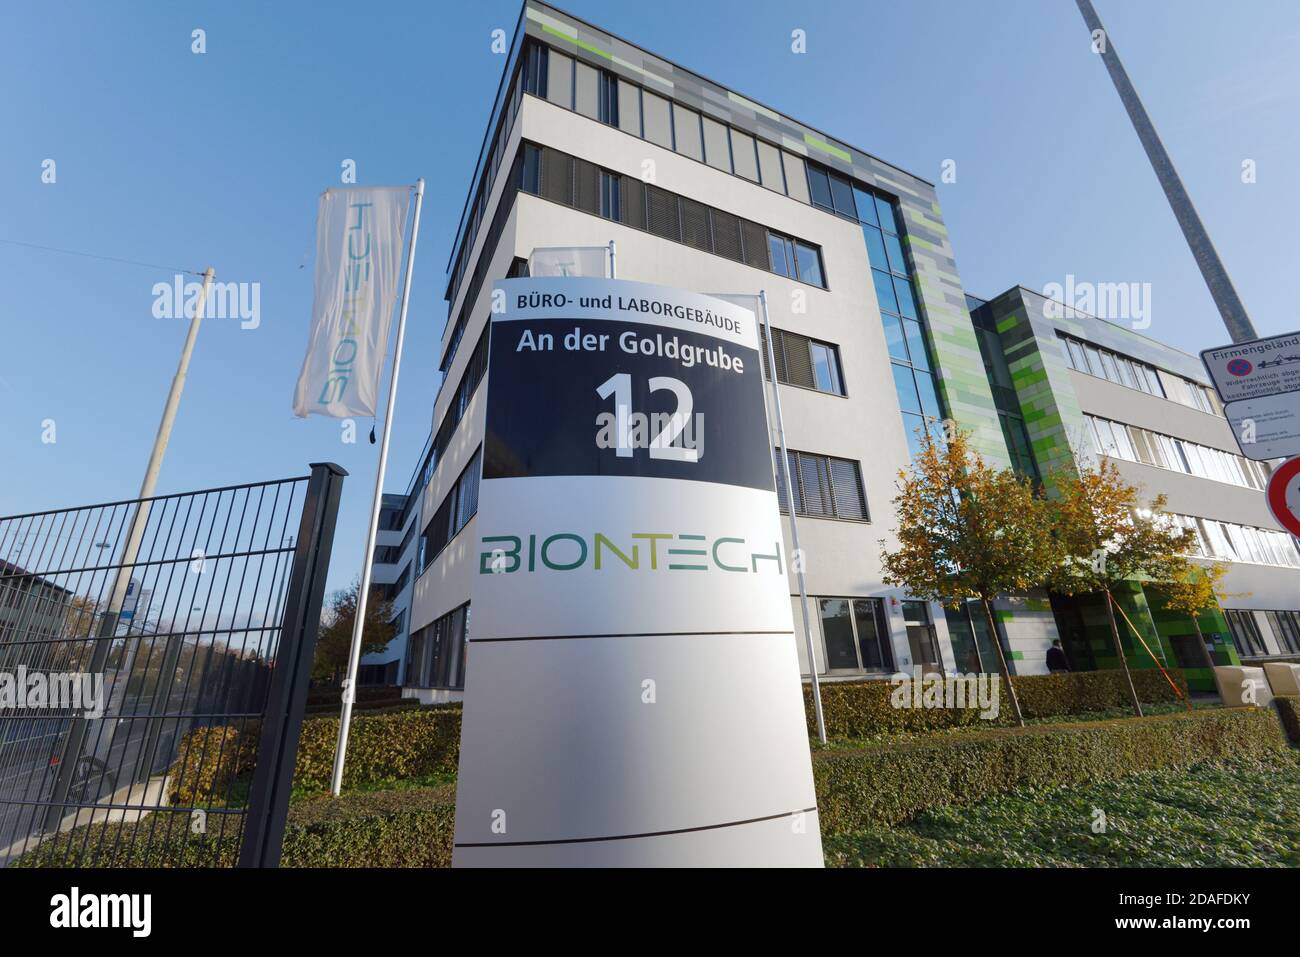 Mainz, Germany - November 12, 2020: The german biotechnology company Biontech conducts research in the field of developing a vaccine against Covid-19. Stock Photo